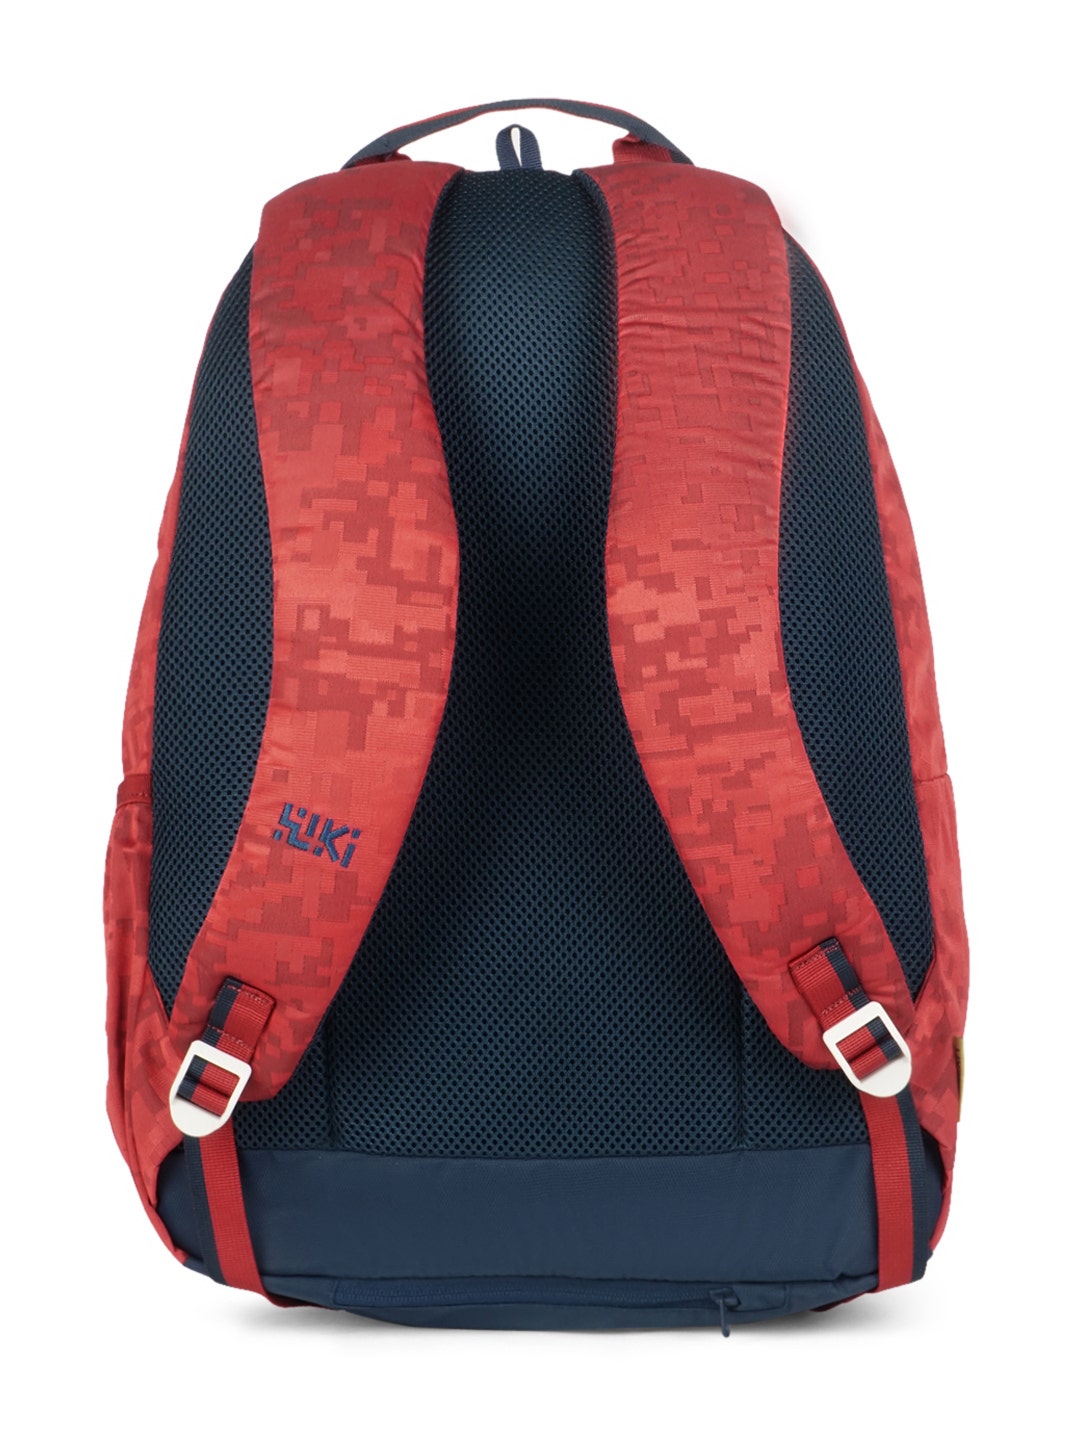 Wildcraft 29.5 Ltrs Casual Backpack (12253) (HxWxD : 18.5x13x7.5)(inches)